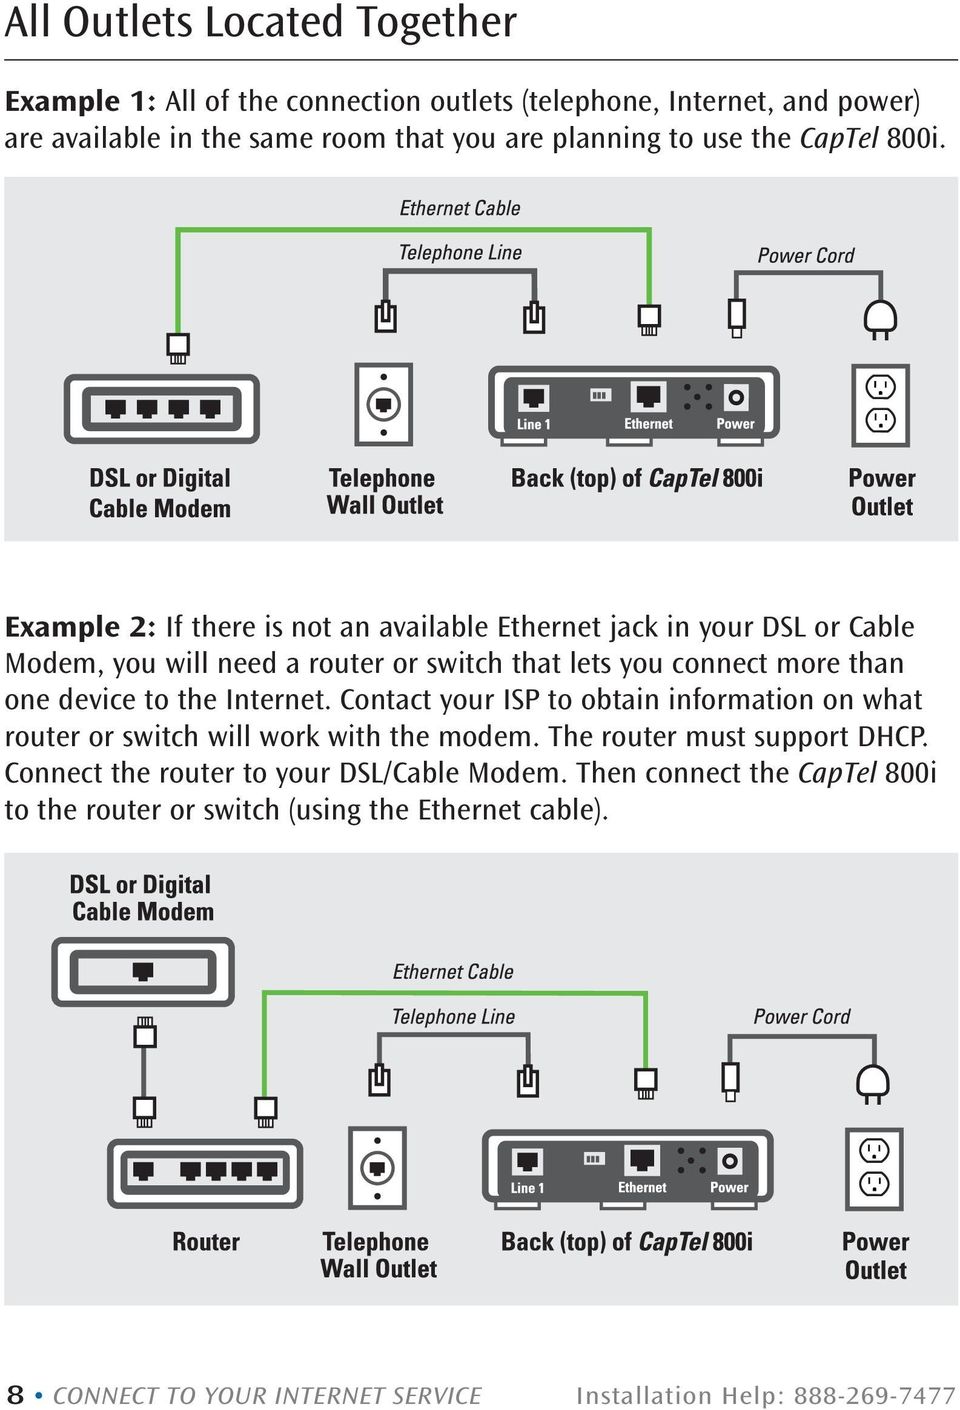 Example 2: If there is not an available Ethernet jack in your DSL or Cable Modem, you will need a router or switch that lets you connect more than one device to the